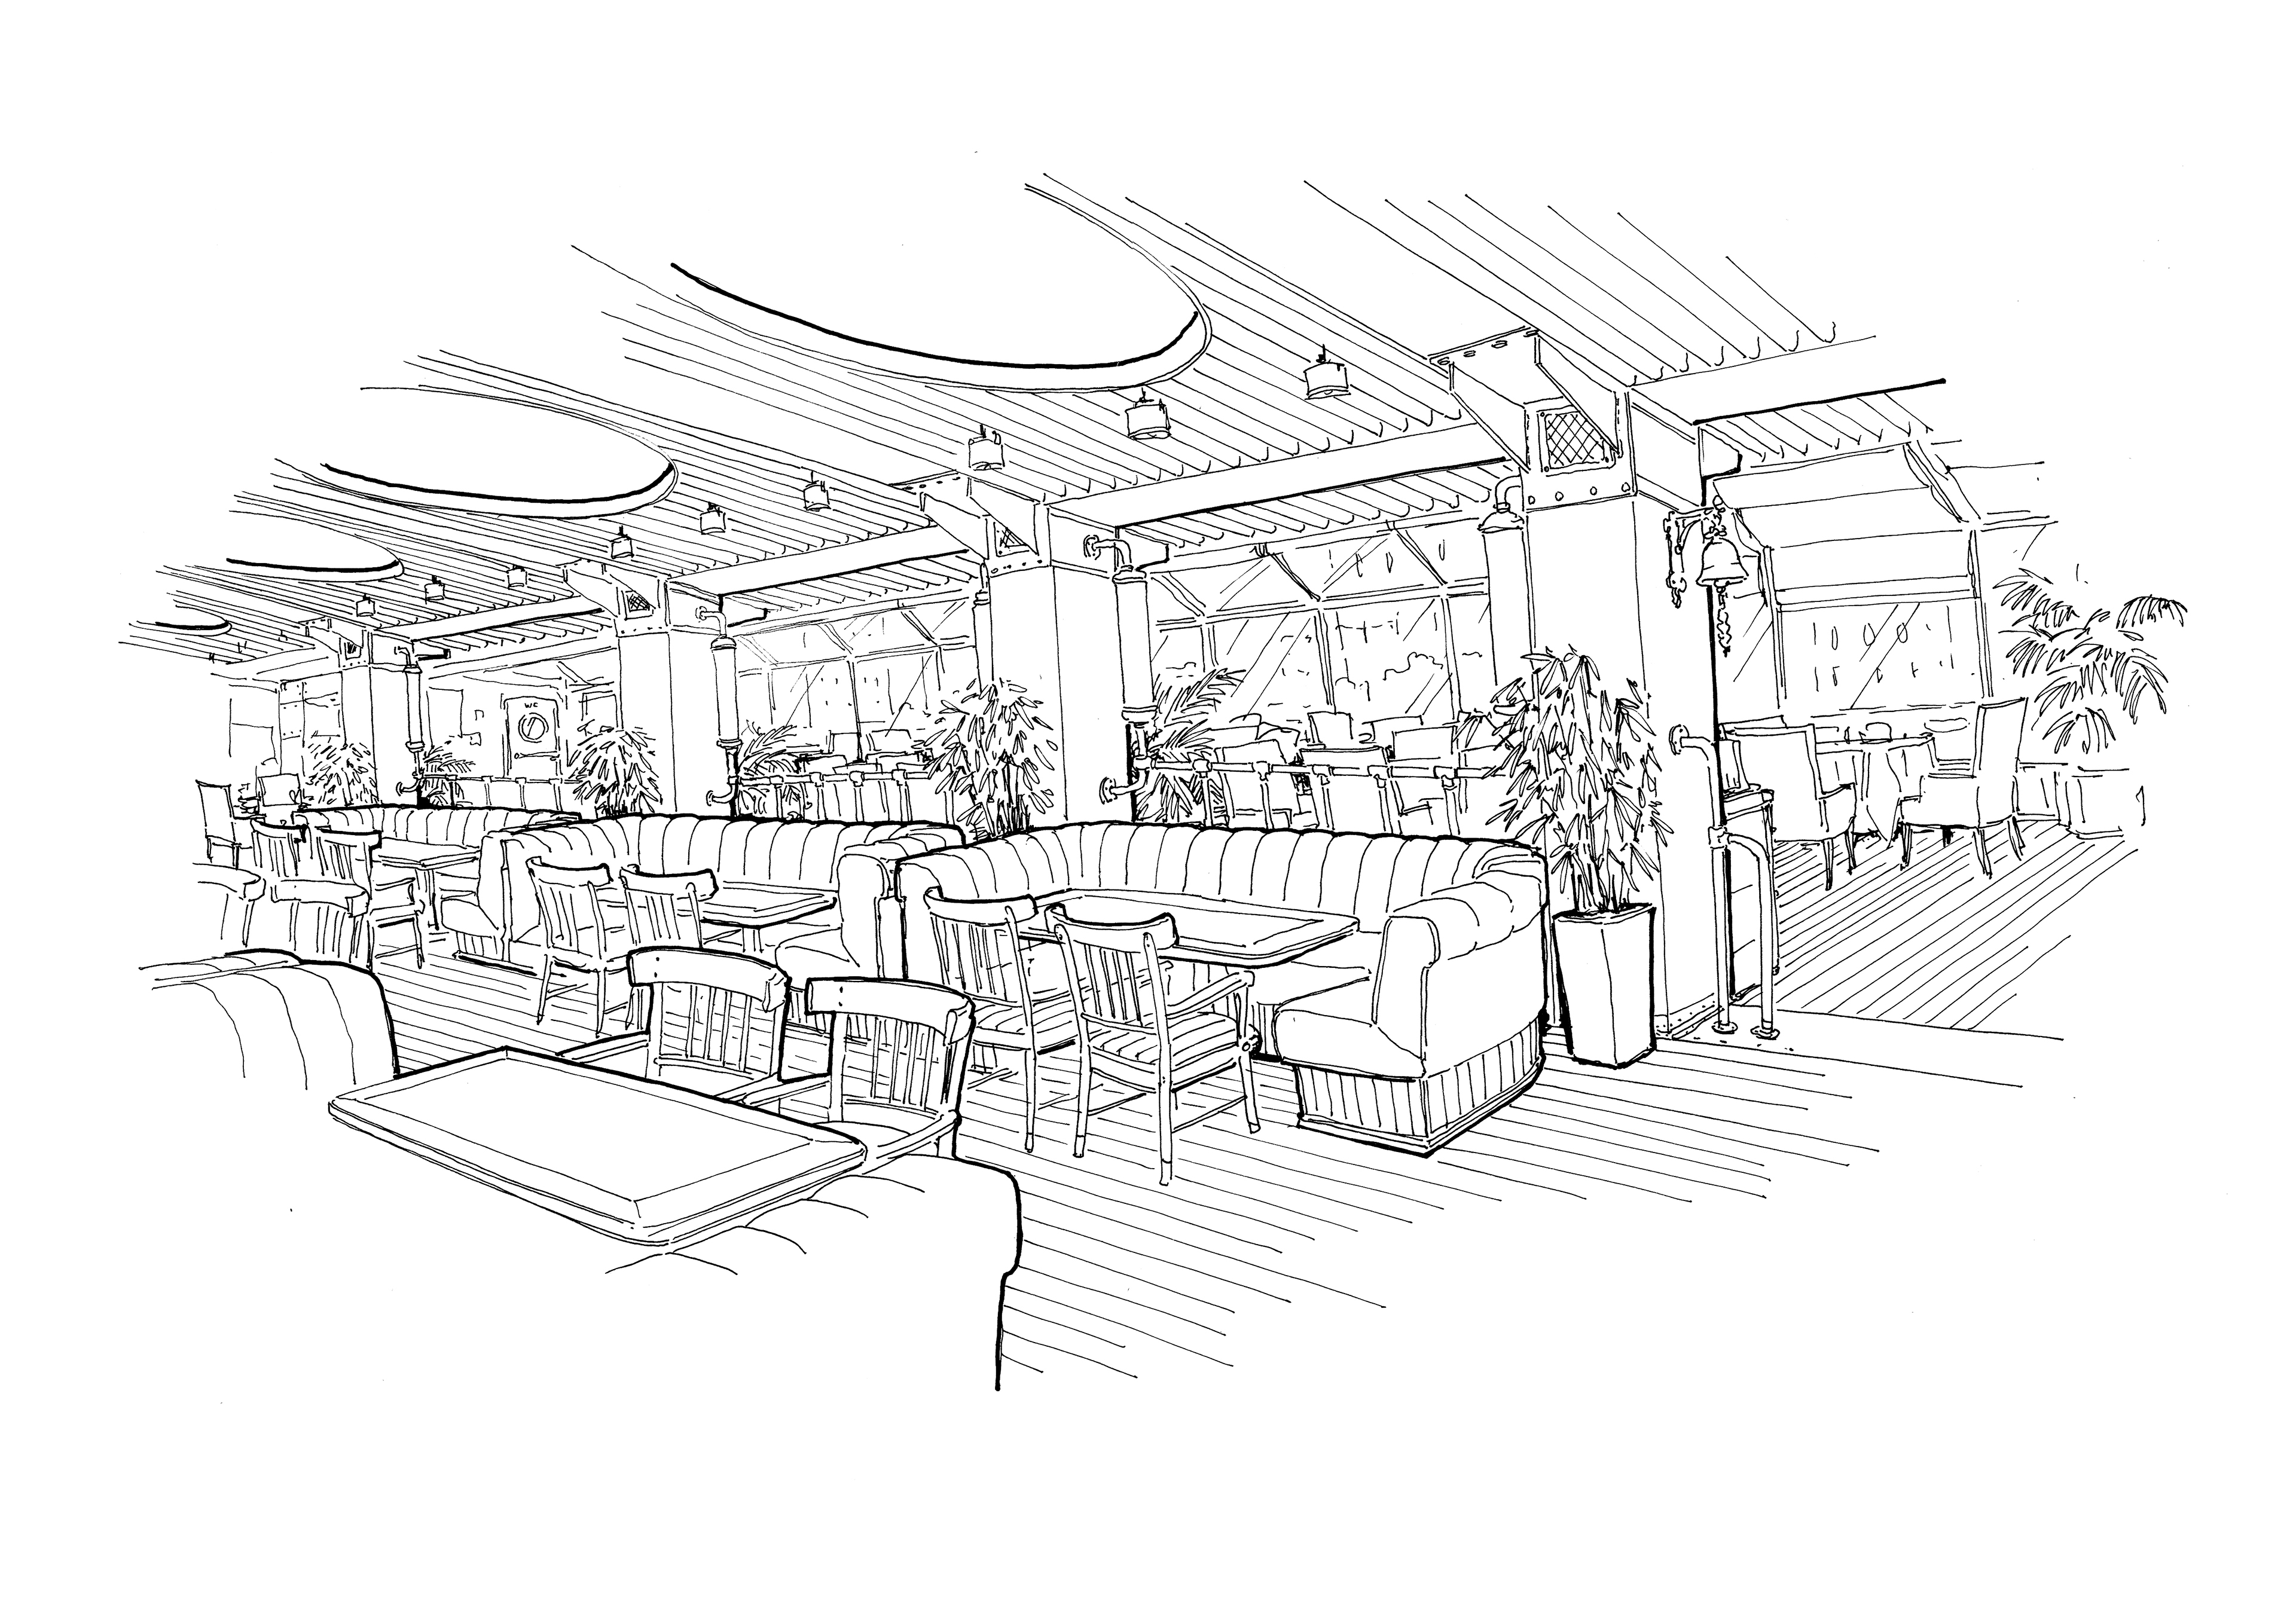 Render Black and White Sketch of the Chinese Restaurant Interior Design.  Stock Illustration - Illustration of architecture, perspective: 110698479